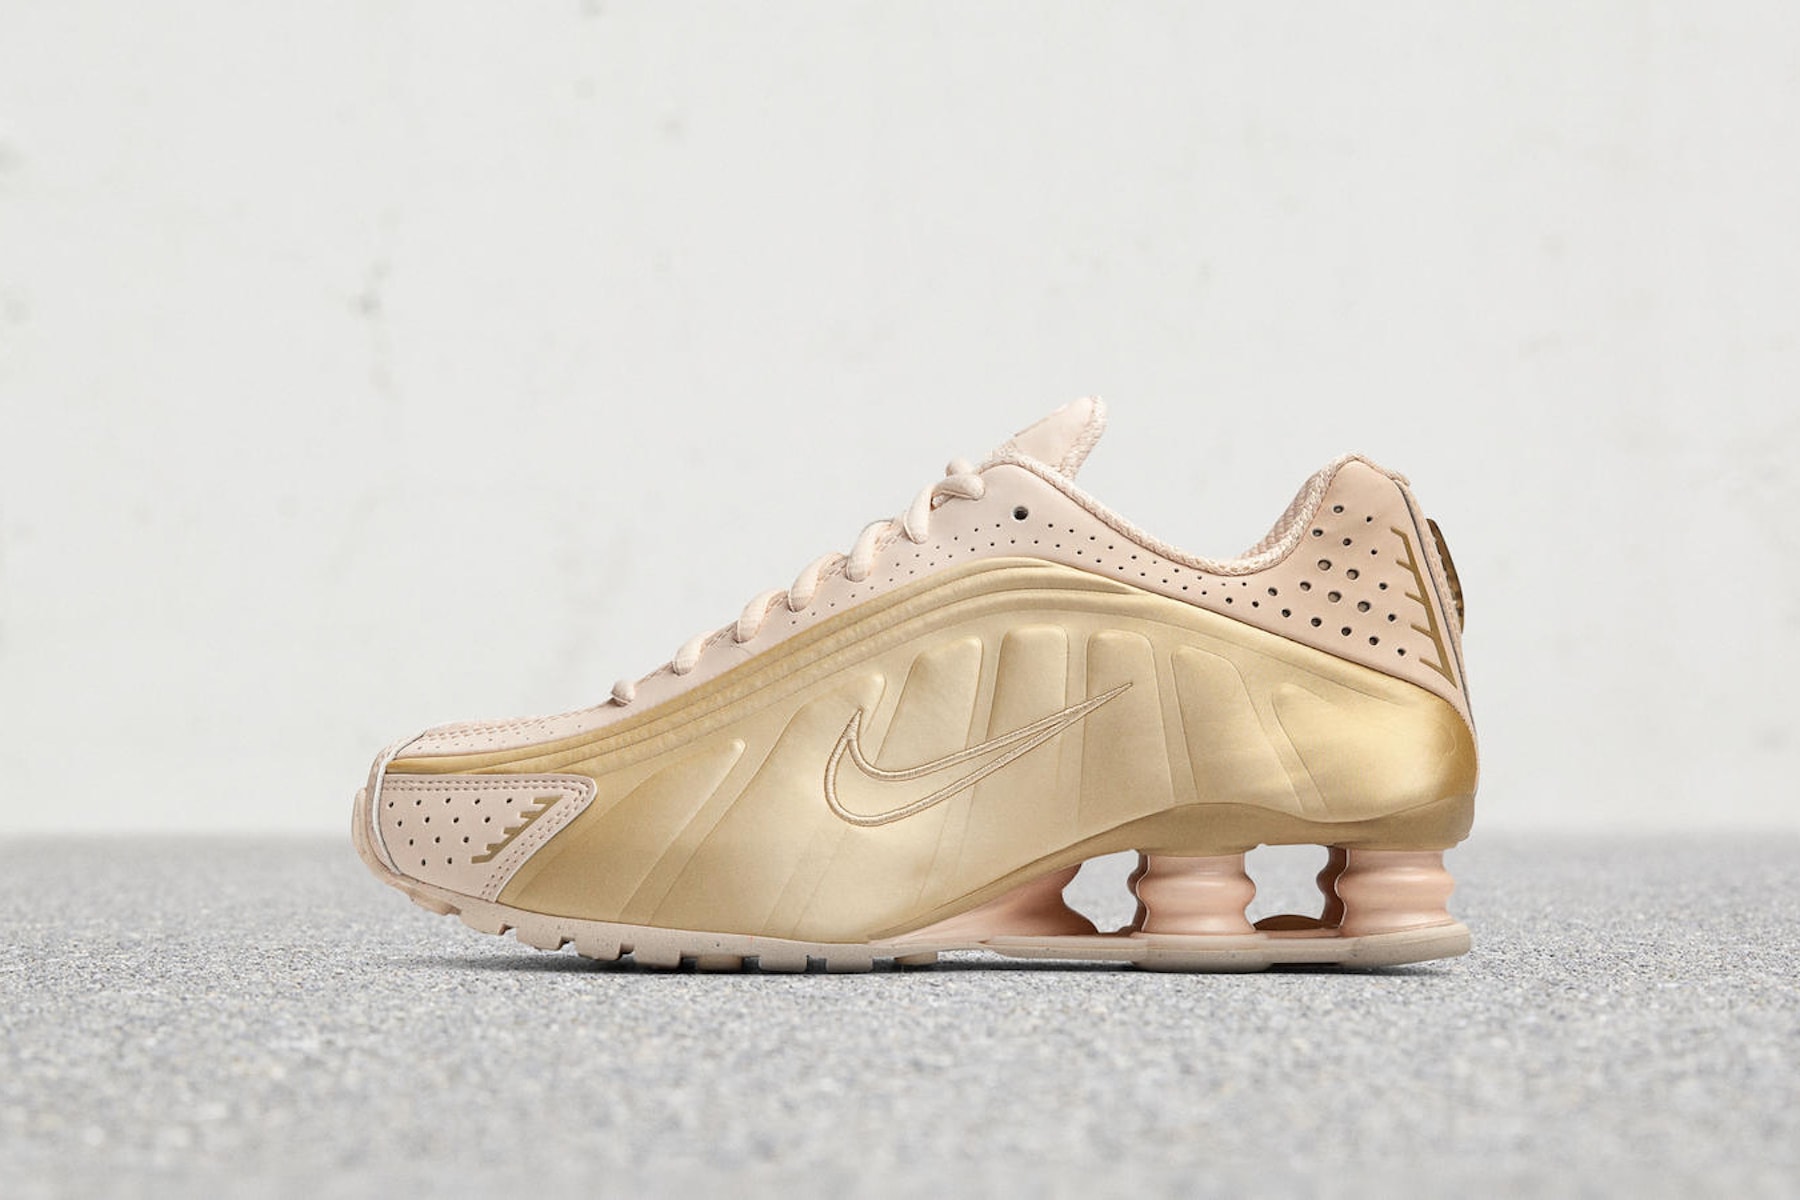 A Full Look at Nike's Summer 2019 Sneaker Drops Women's World Cup Nike Air Max Dia 270 Zoom Fly SP 